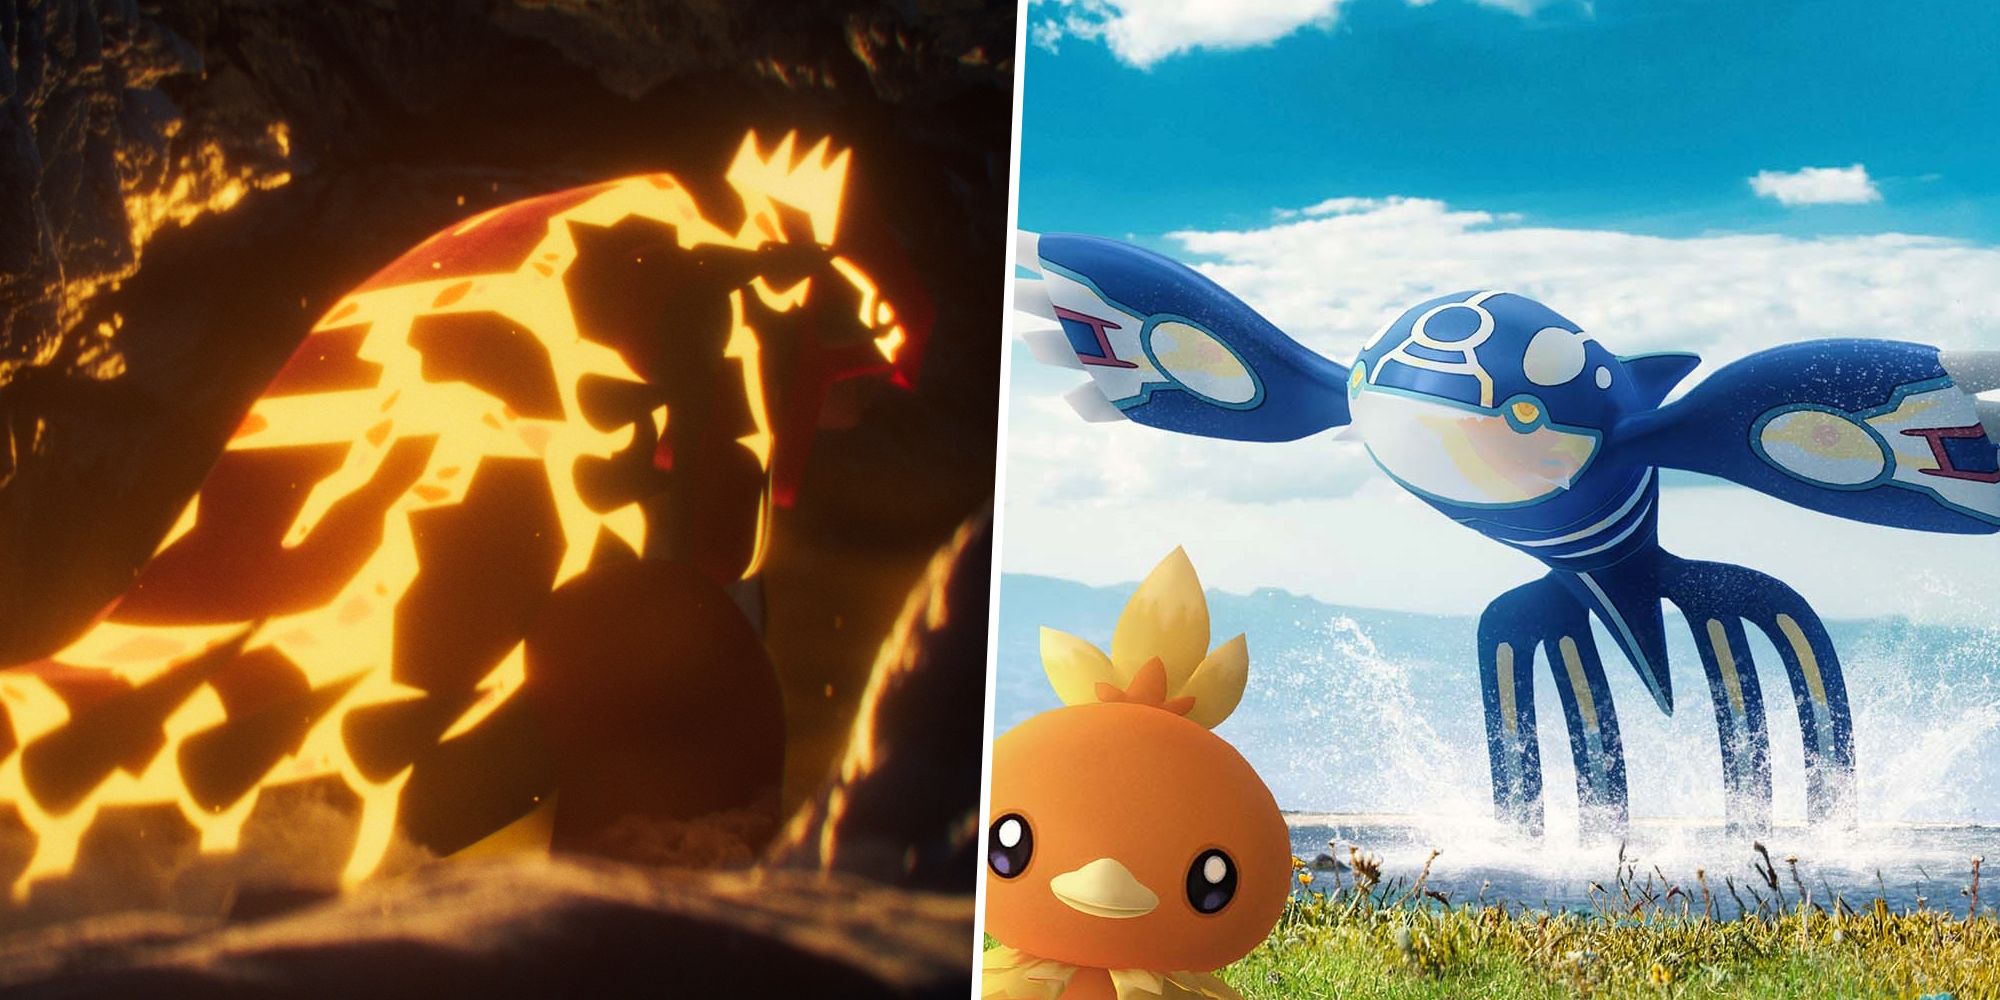 Image of Primal Groudon turned around split with an image of Primal Kyogre and Torchic